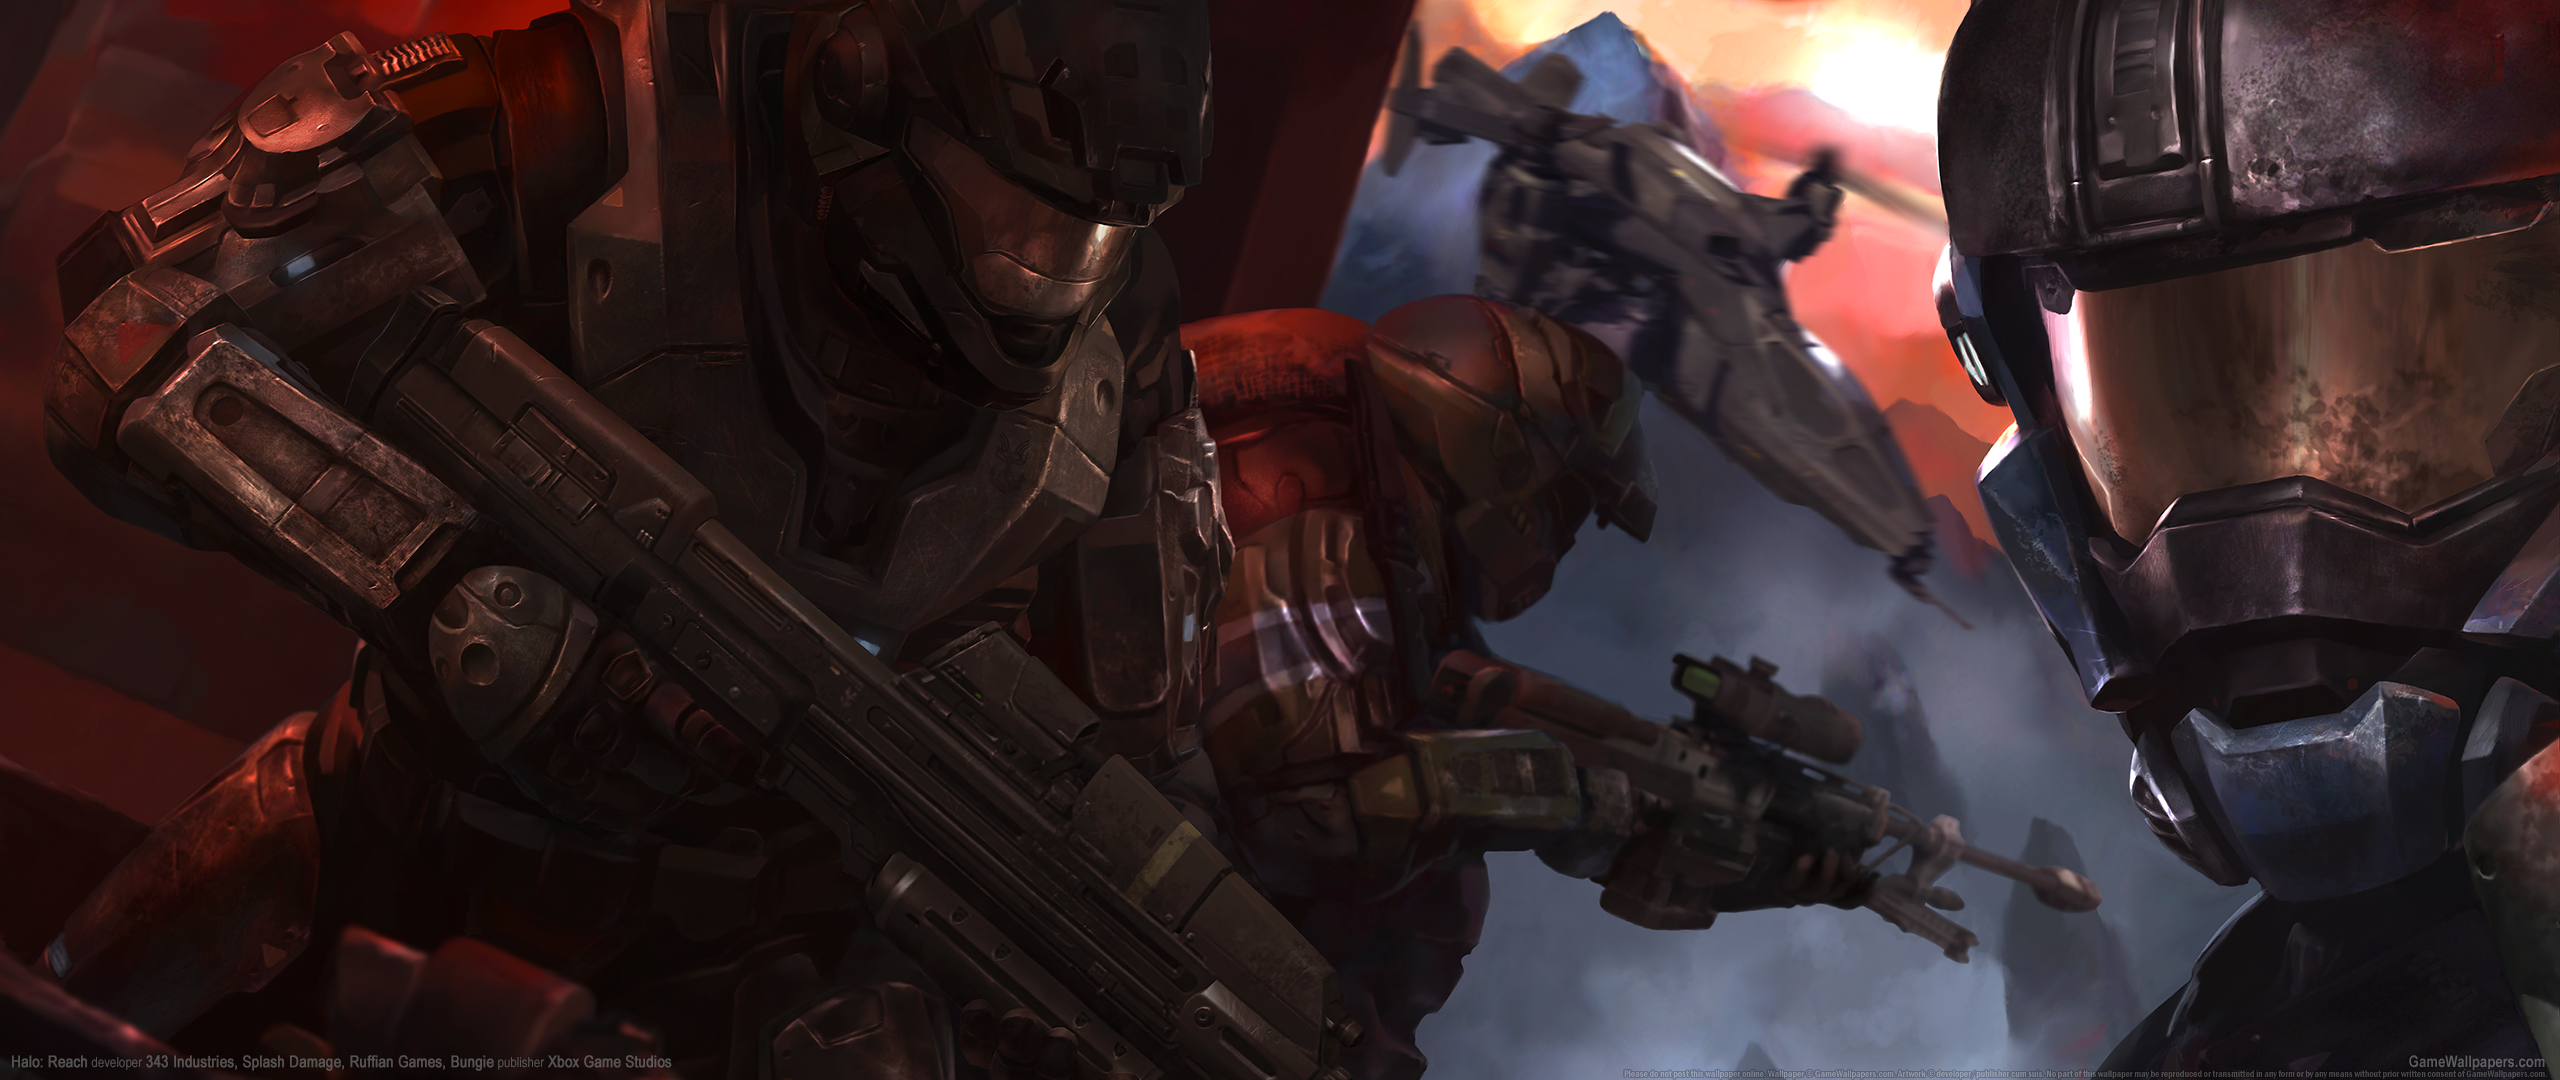 Halo: Reach 2560x1080 wallpaper or background 09